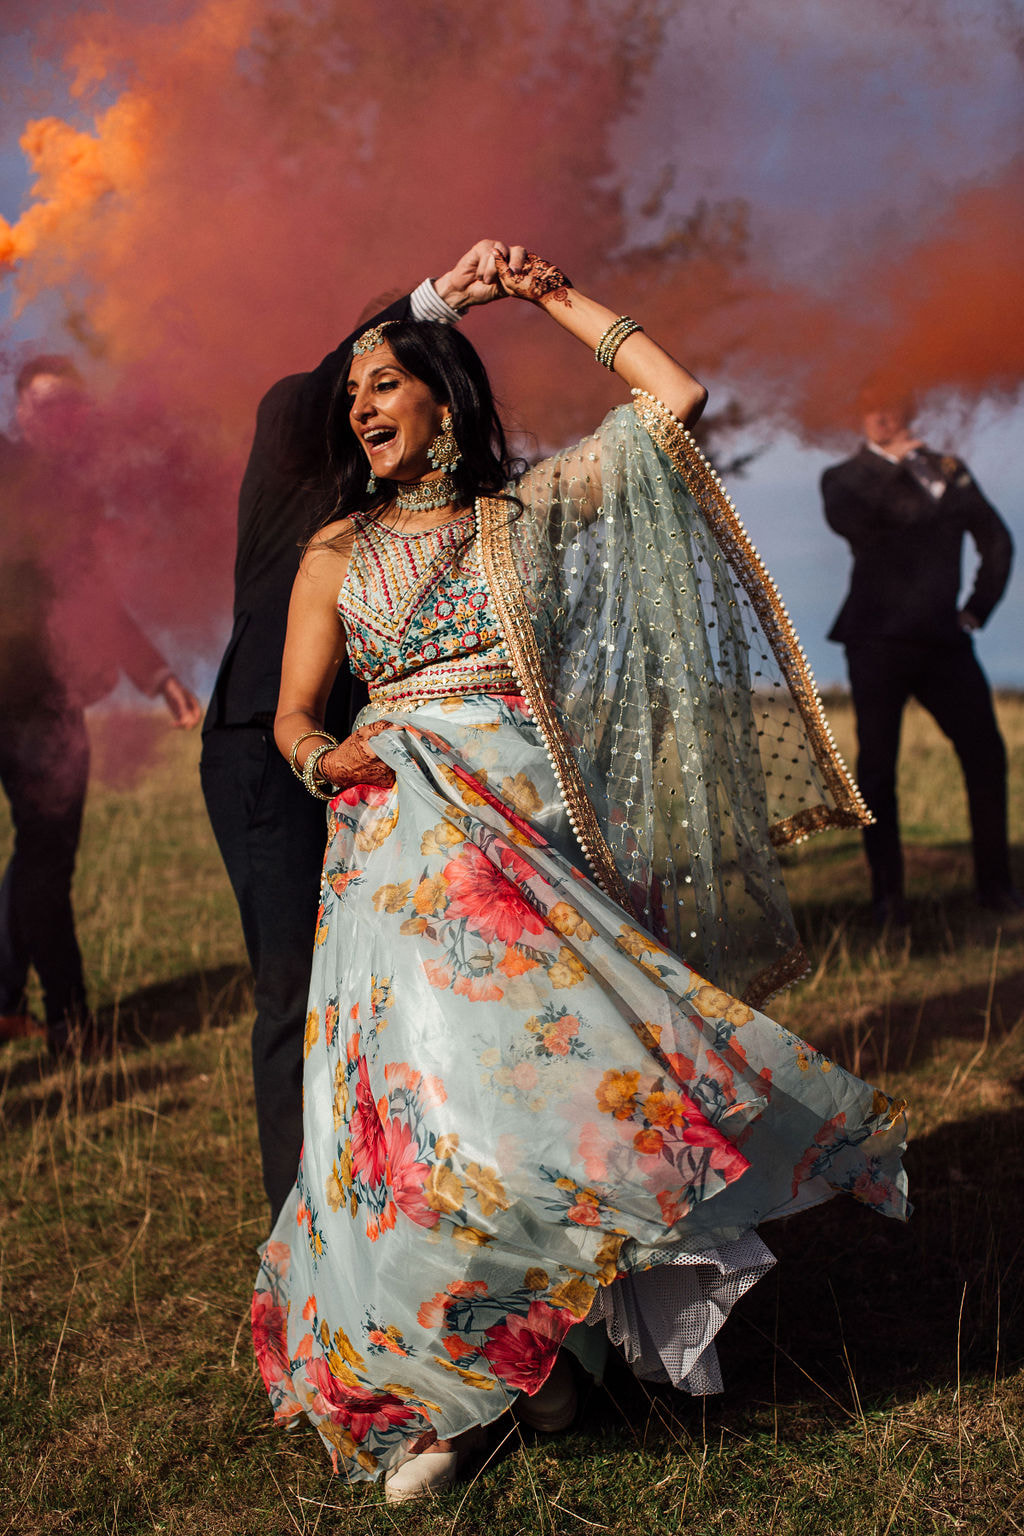 Dancing indian bride with colourful smoke bombs and bright wedding sari